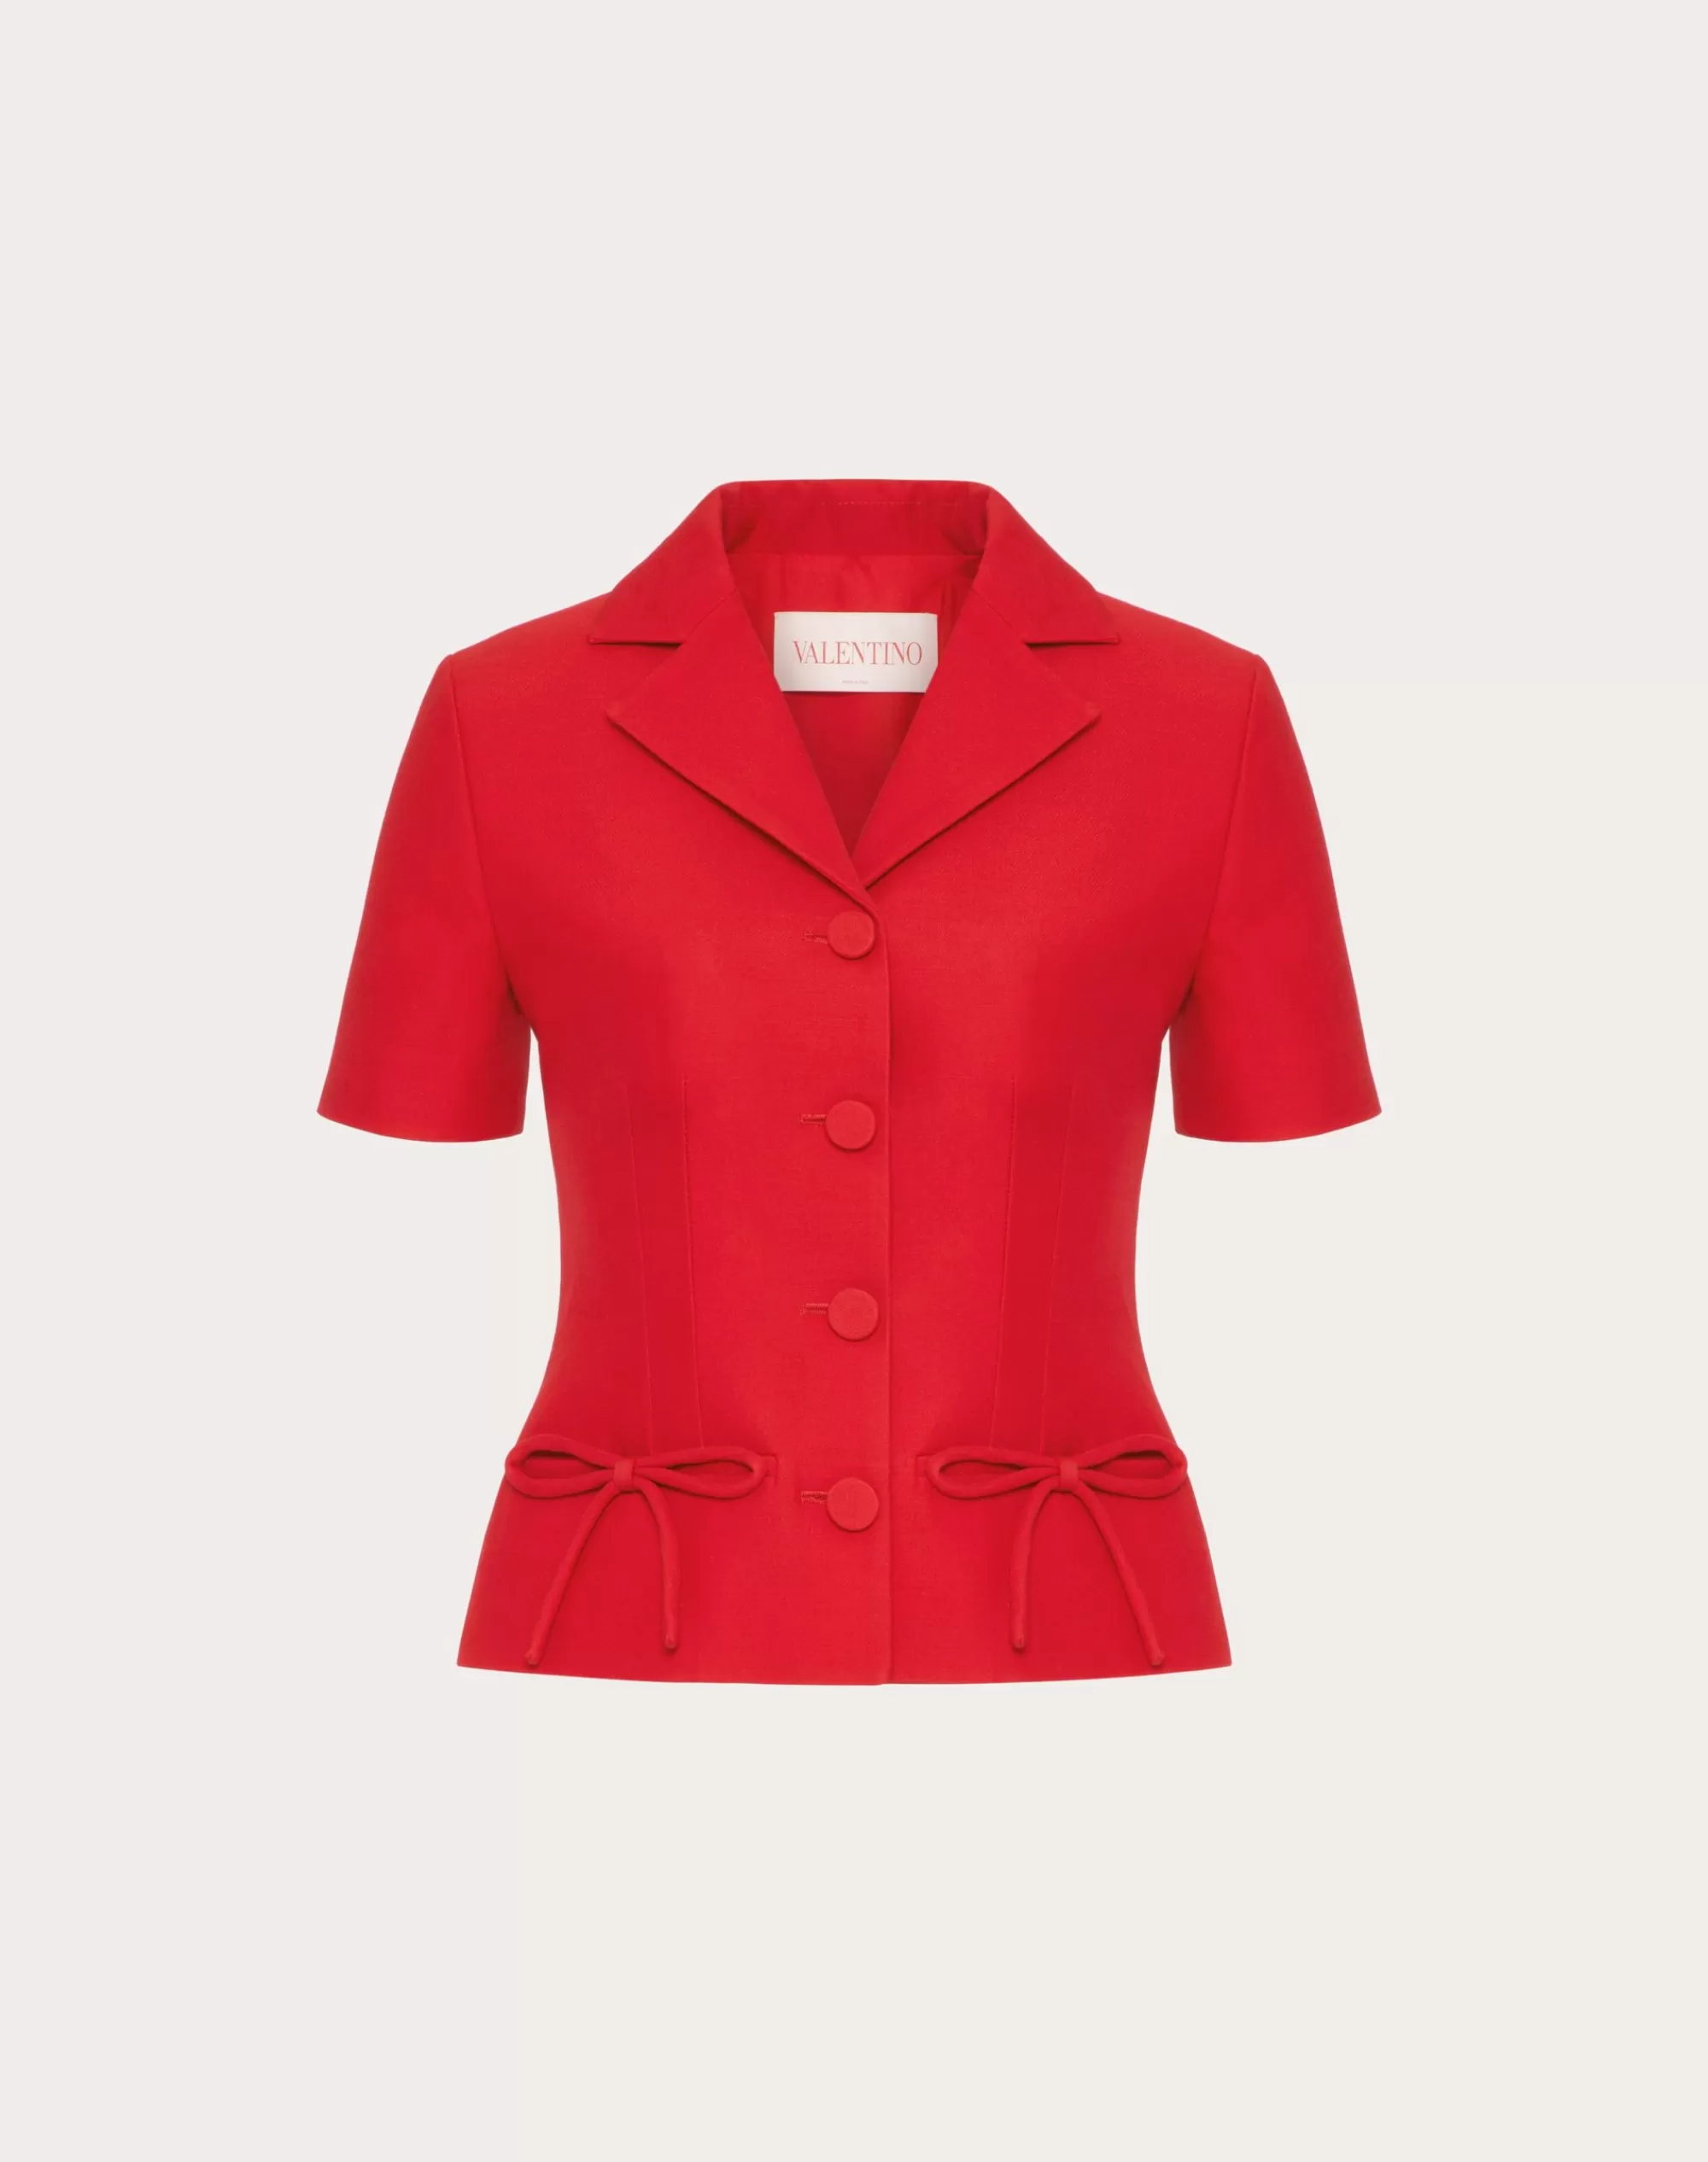 Valentino CREPE COUTURE JACKET Red Fashion